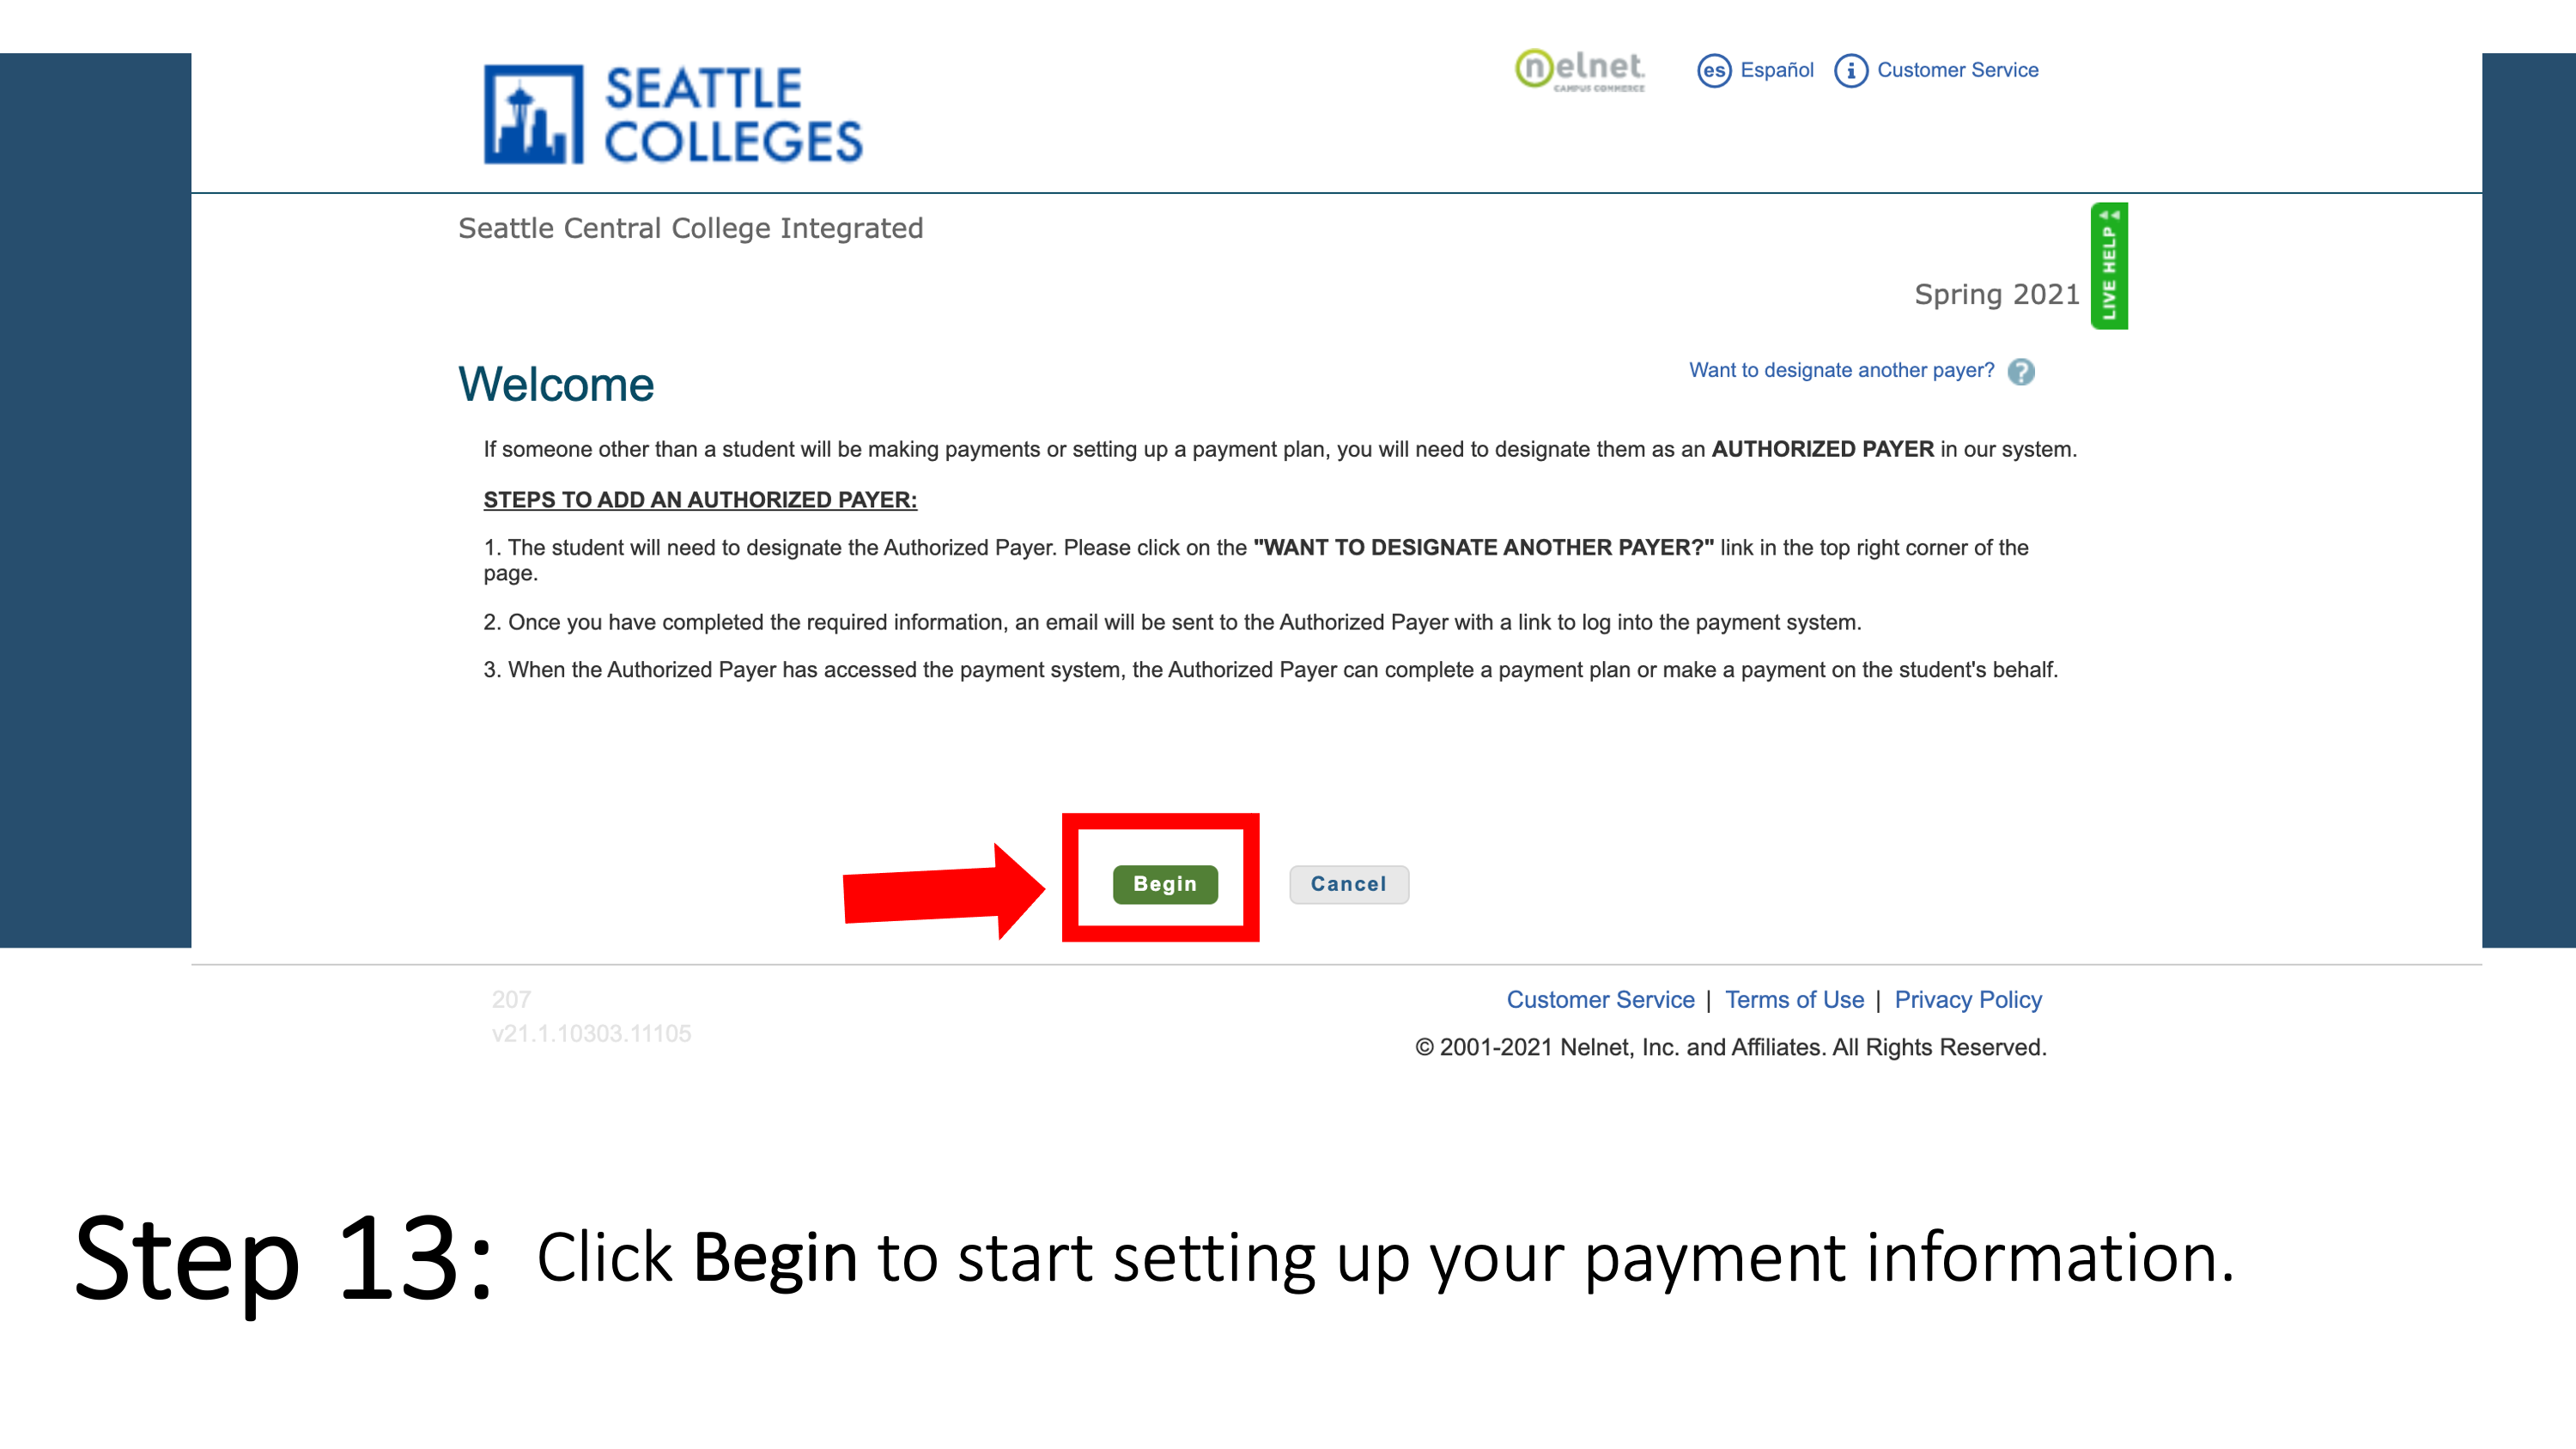 Click Begin to start setting up your payment information. Please read carefully as you go through the payment set-up process.